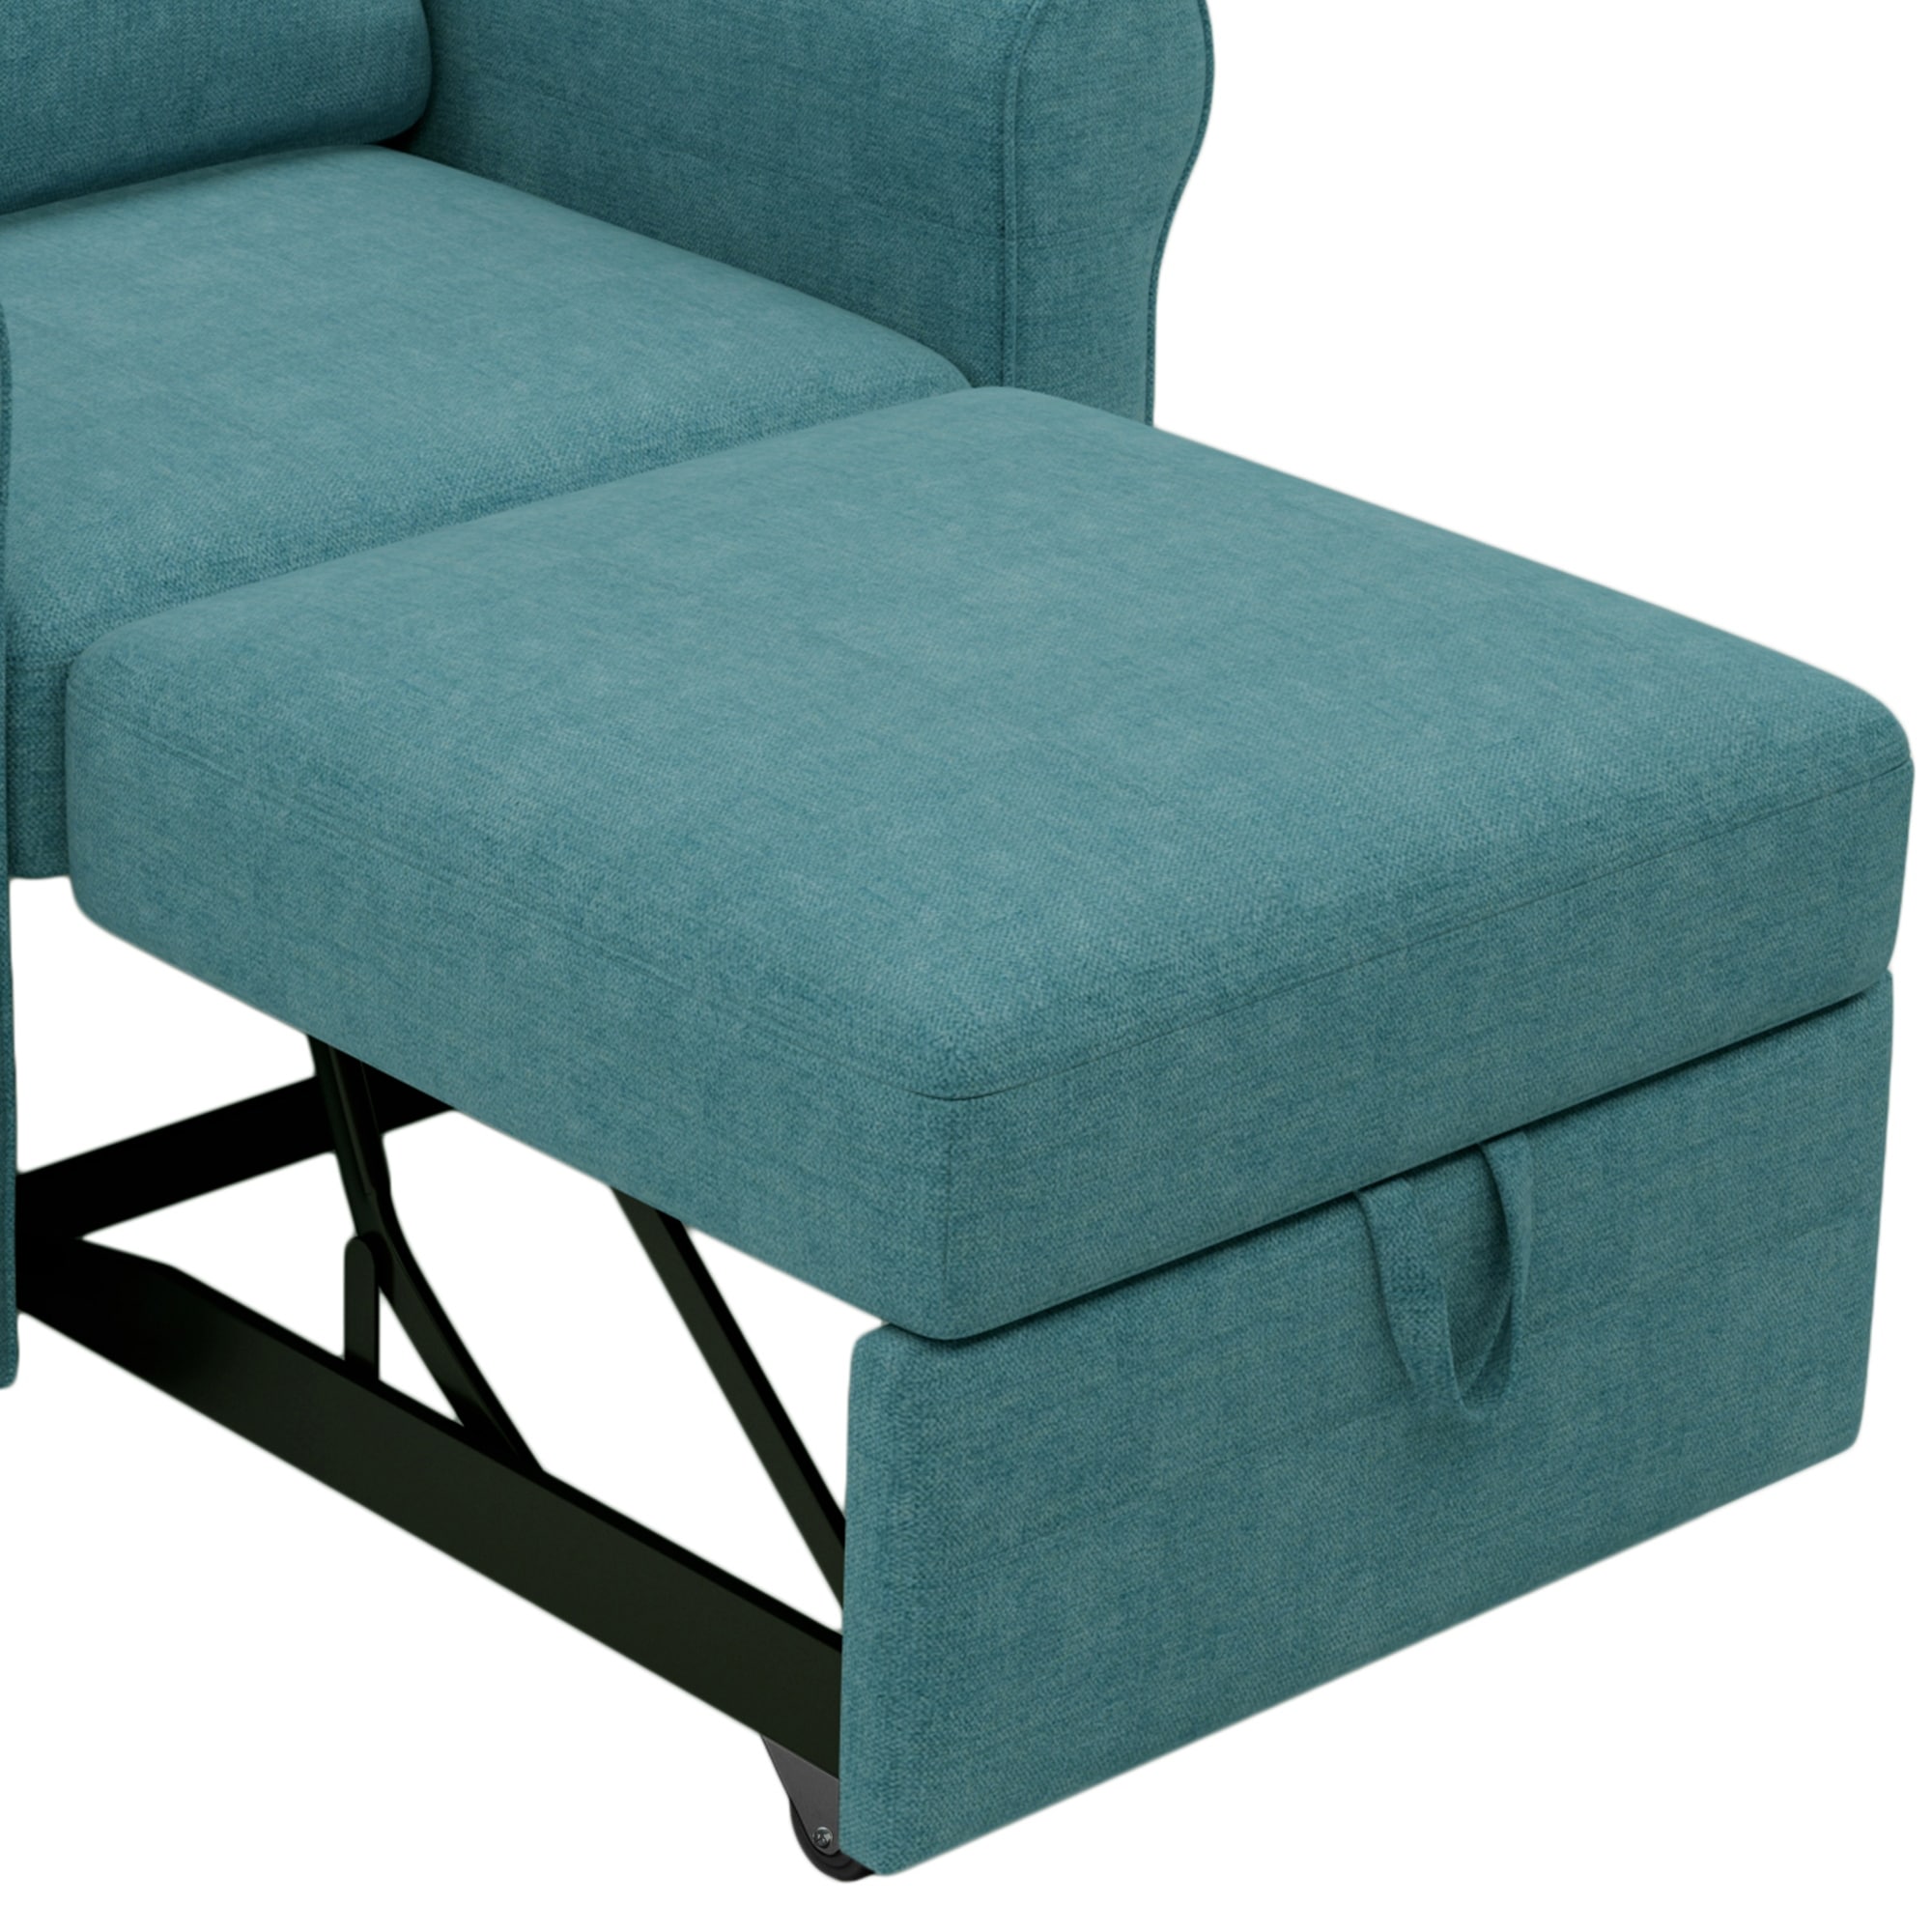 3-in-1 Sofa Bed Chair Convertible Sleeper Chair Bed Modern Adjust Backrest Single Sofa Bed Livingroom Accent Chair for Bedroom - Teal